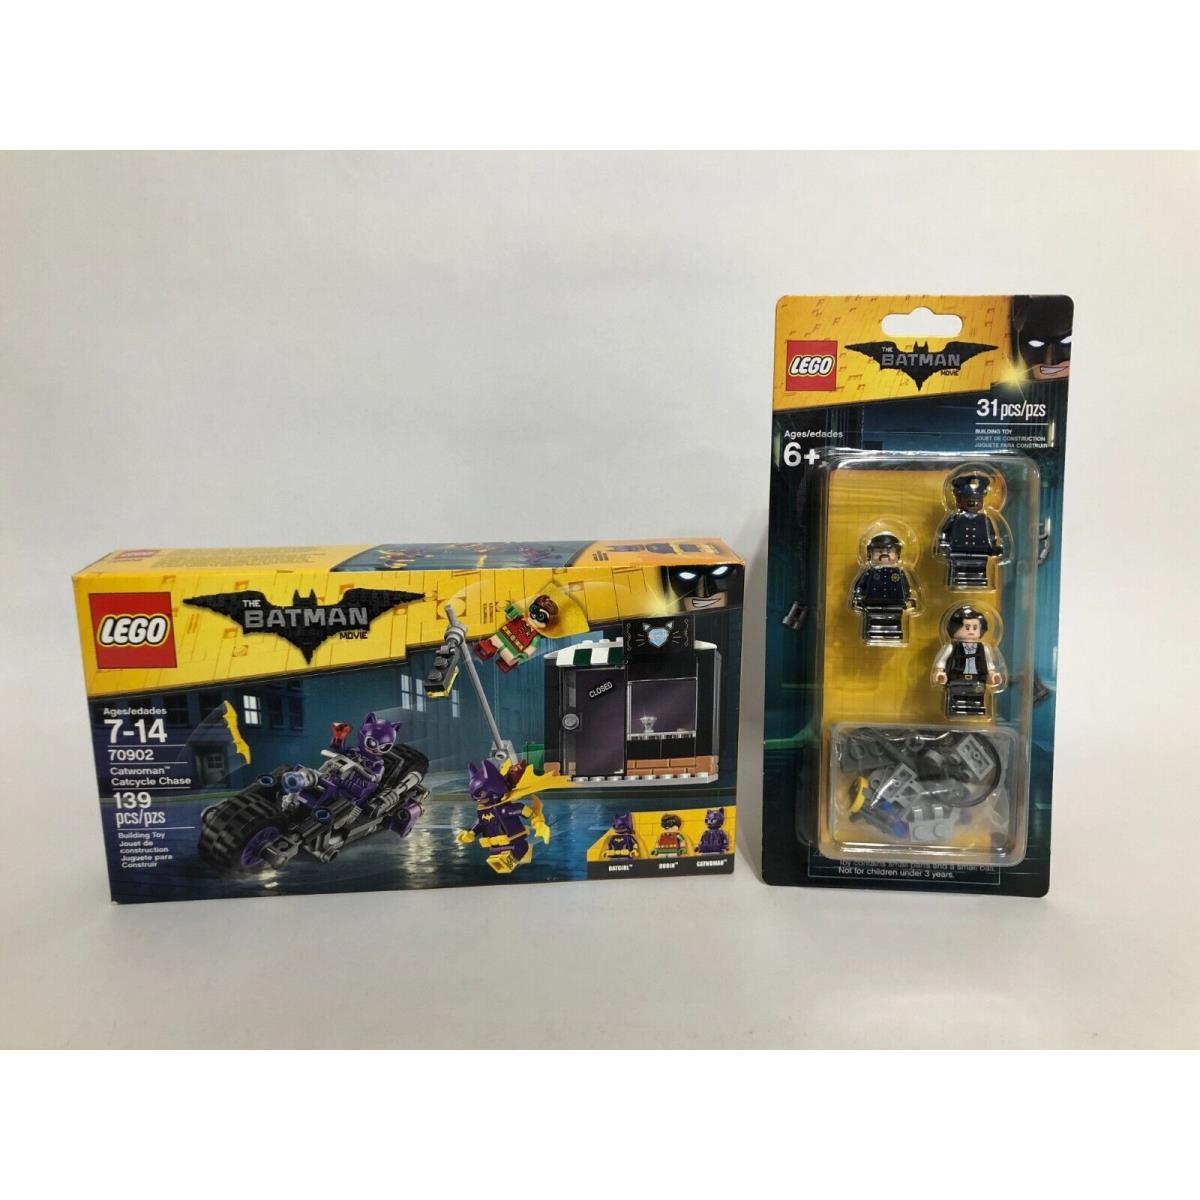 Lego The Batman Movie 70902 Catwoman Catcycle Chase and 853651 Accessory Set